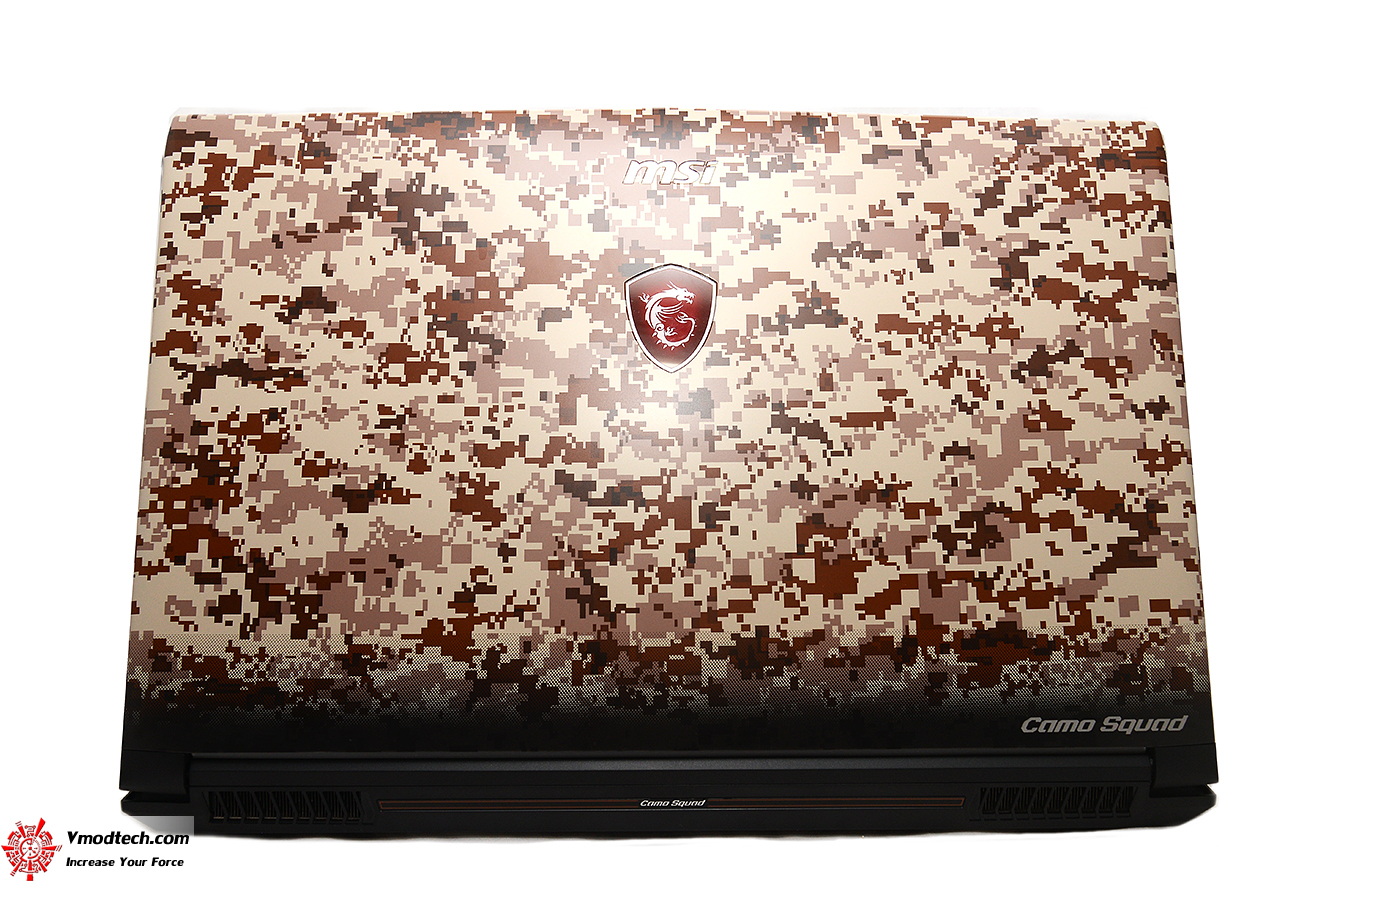 dsc 11881 MSI GE62 7RE Camo Squad Limited Edition Review